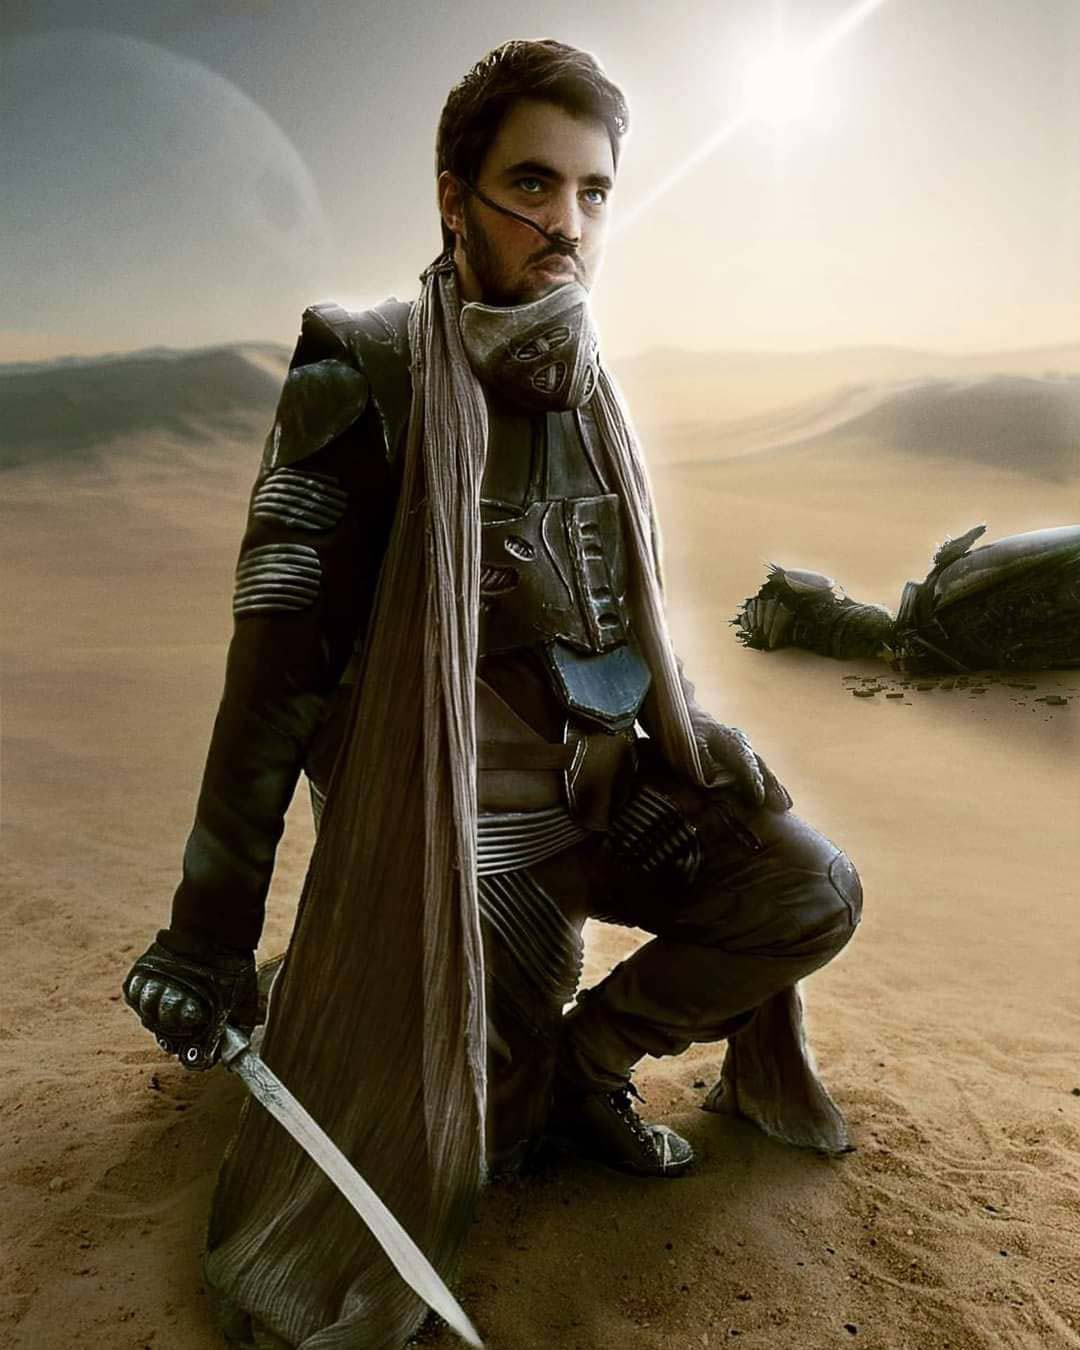 Cosplay of a Fremen warrior, by Dylan Sausset.